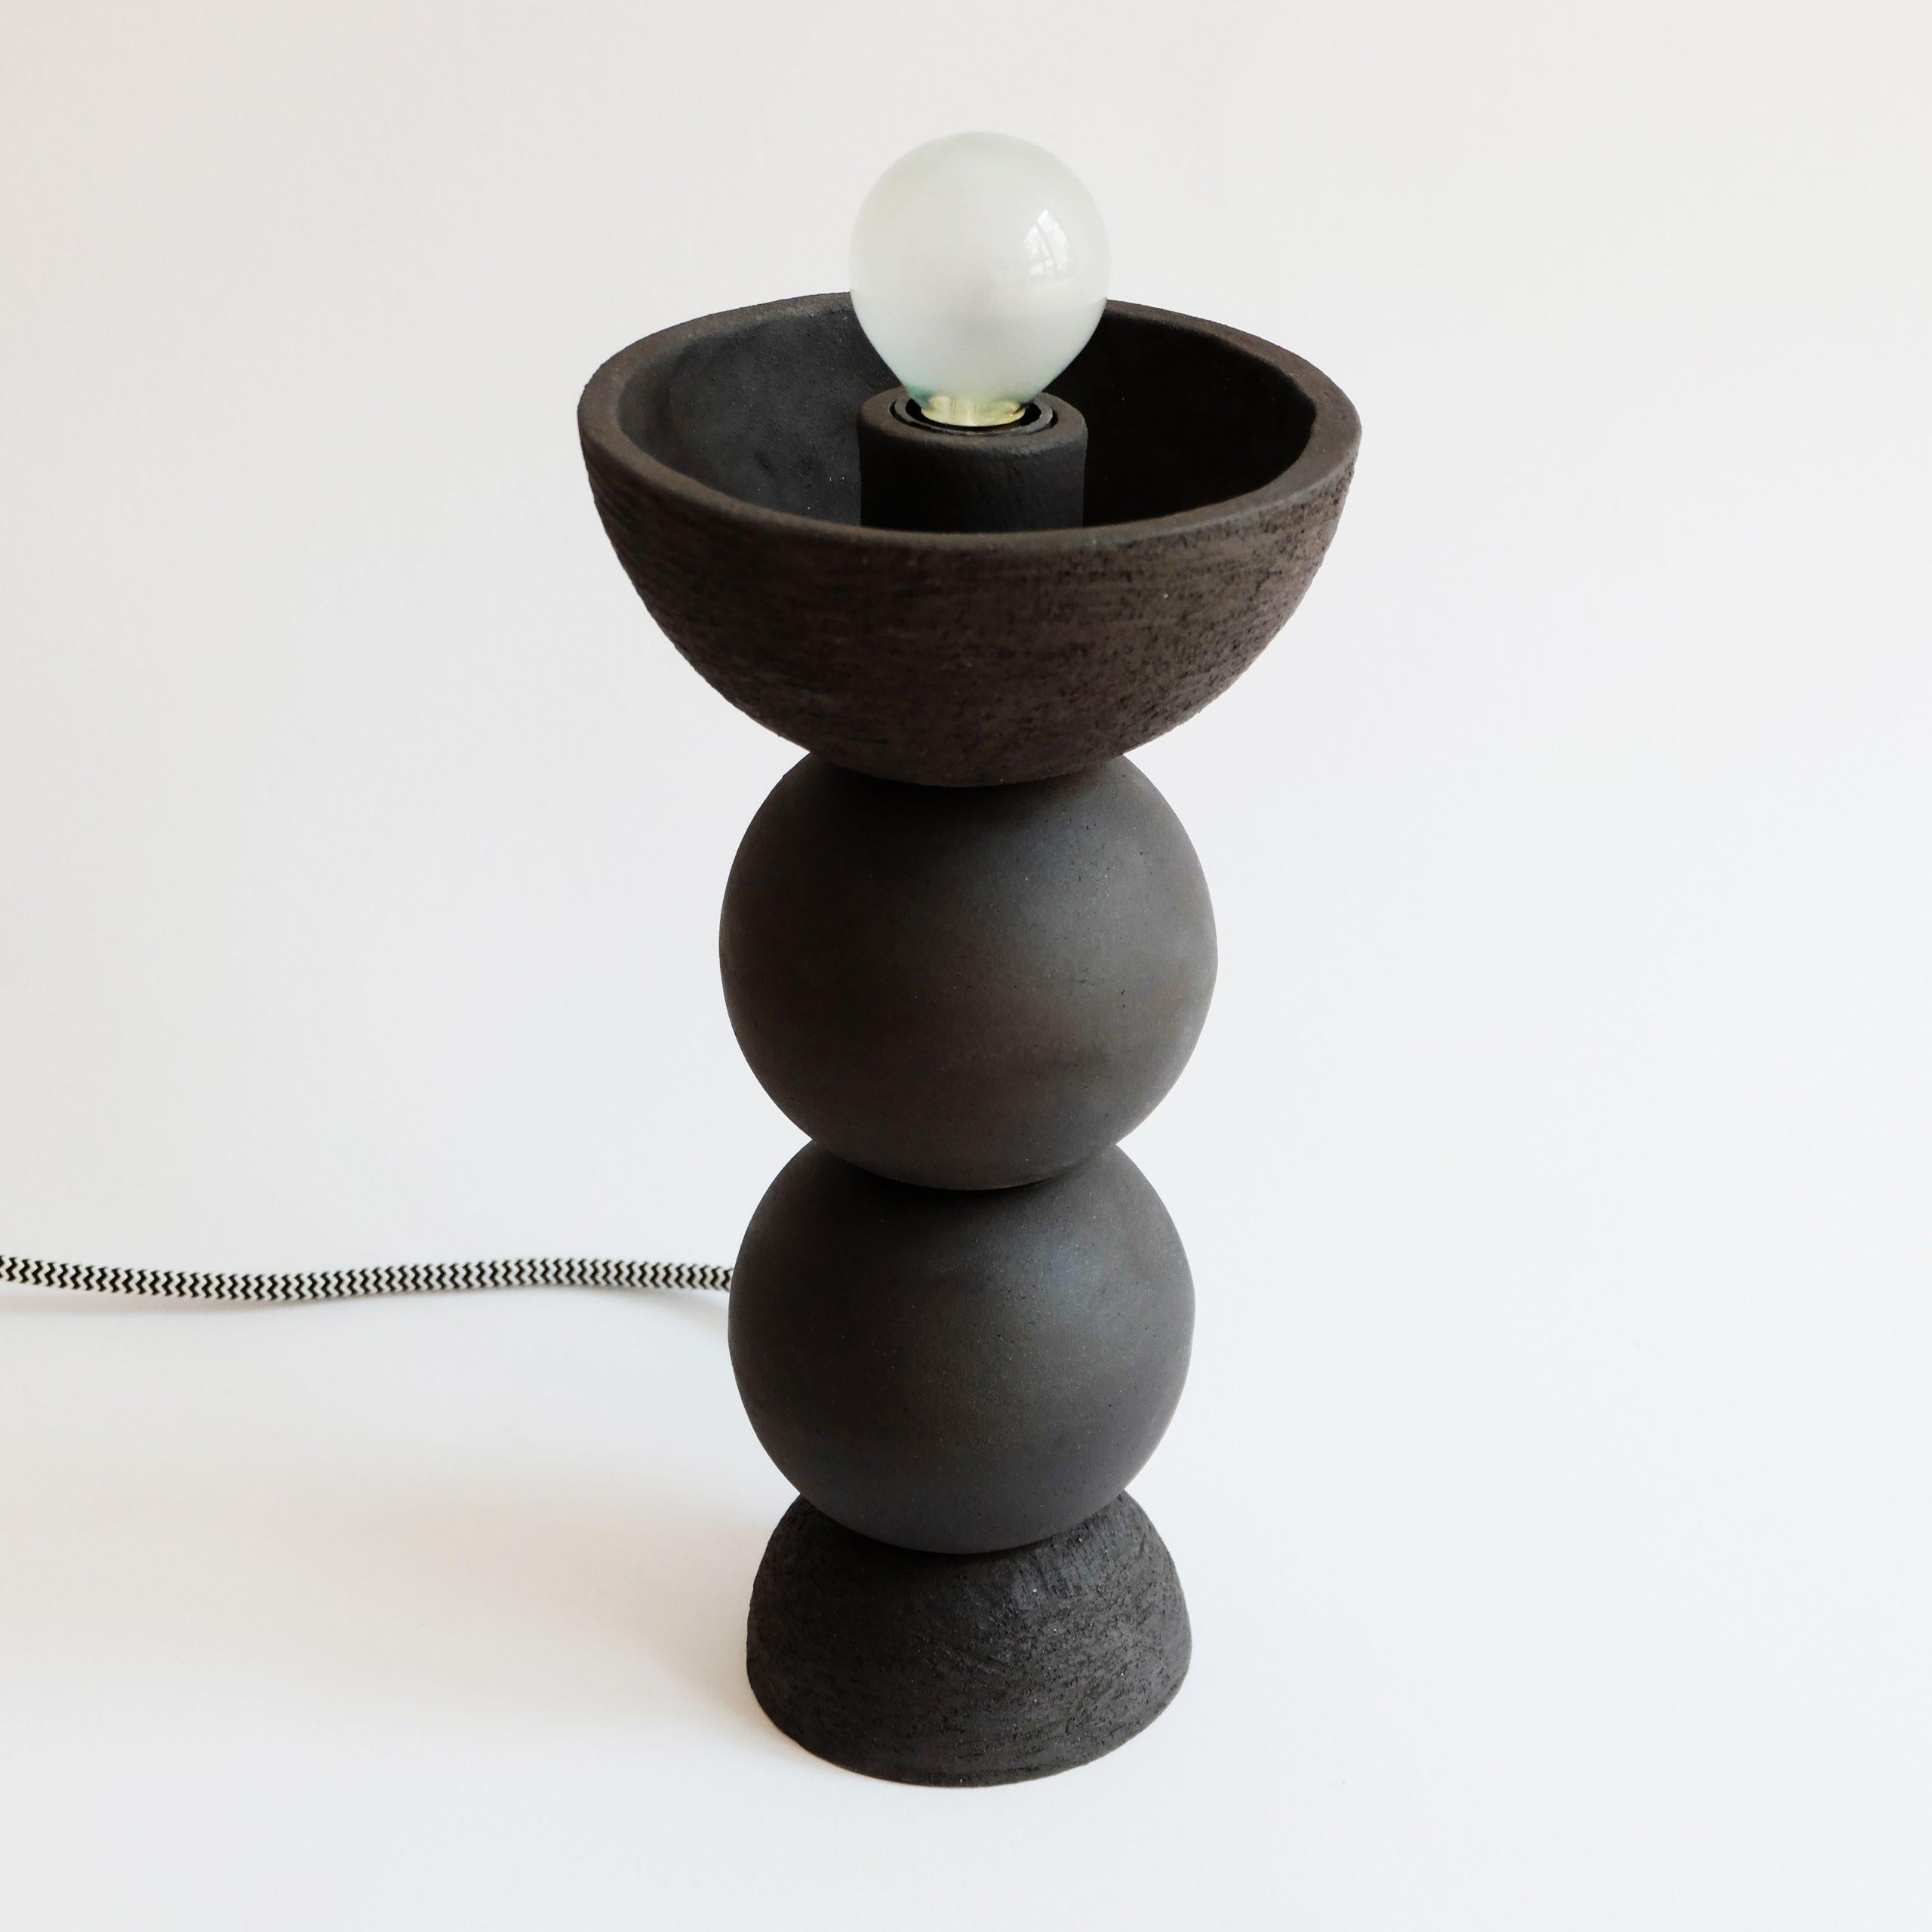 Blob Table Lamp by Ia Kutateladze
One Of A Kind.
Dimensions: W 14 x H 30 cm.
Materials: Clay.

Each piece is one of a kind, due to its free hand-building process. Different color variations available: raw black clay, raw white clay and raw red clay.